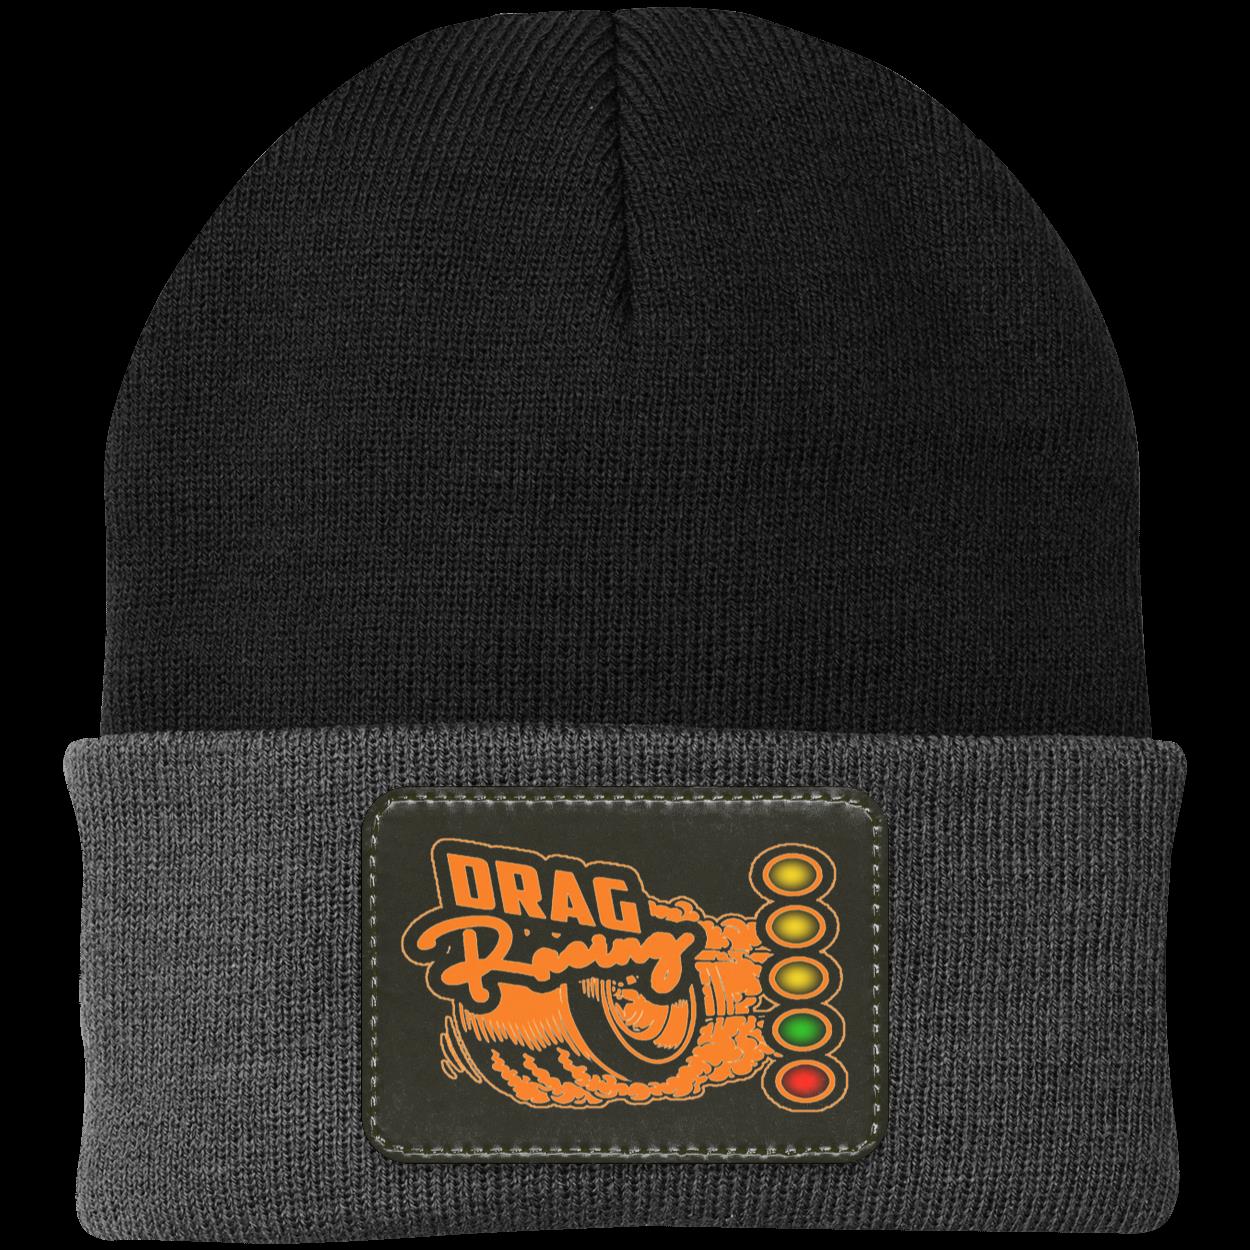 Drag Racing Patched Knit Cap V10